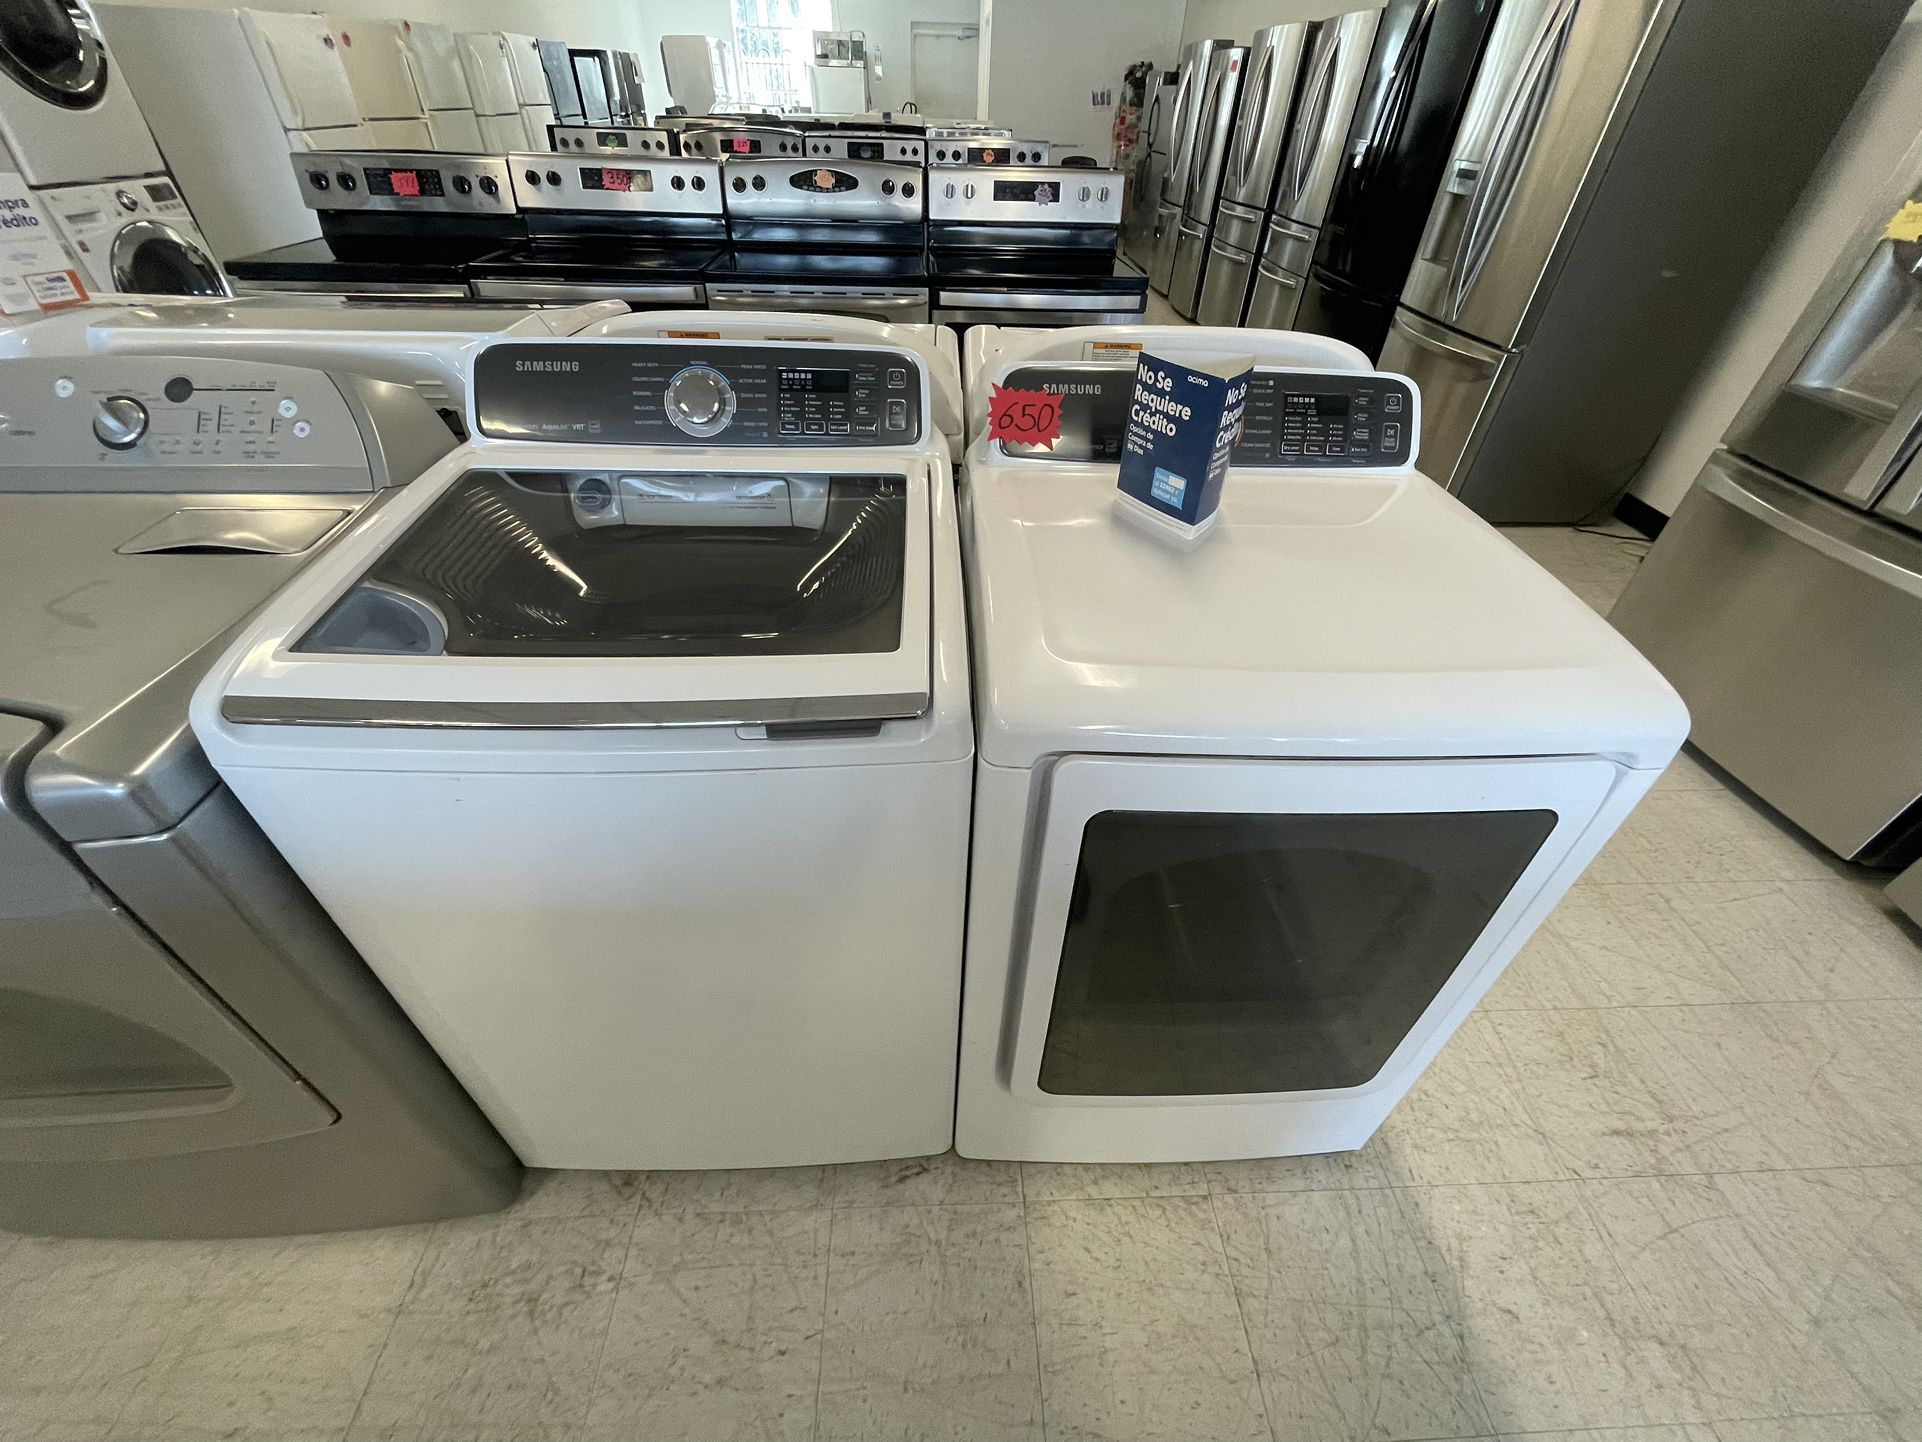 Samsung Tap Load Washer And Electric Dryer Set Used Good Condition With 90days Warranty 